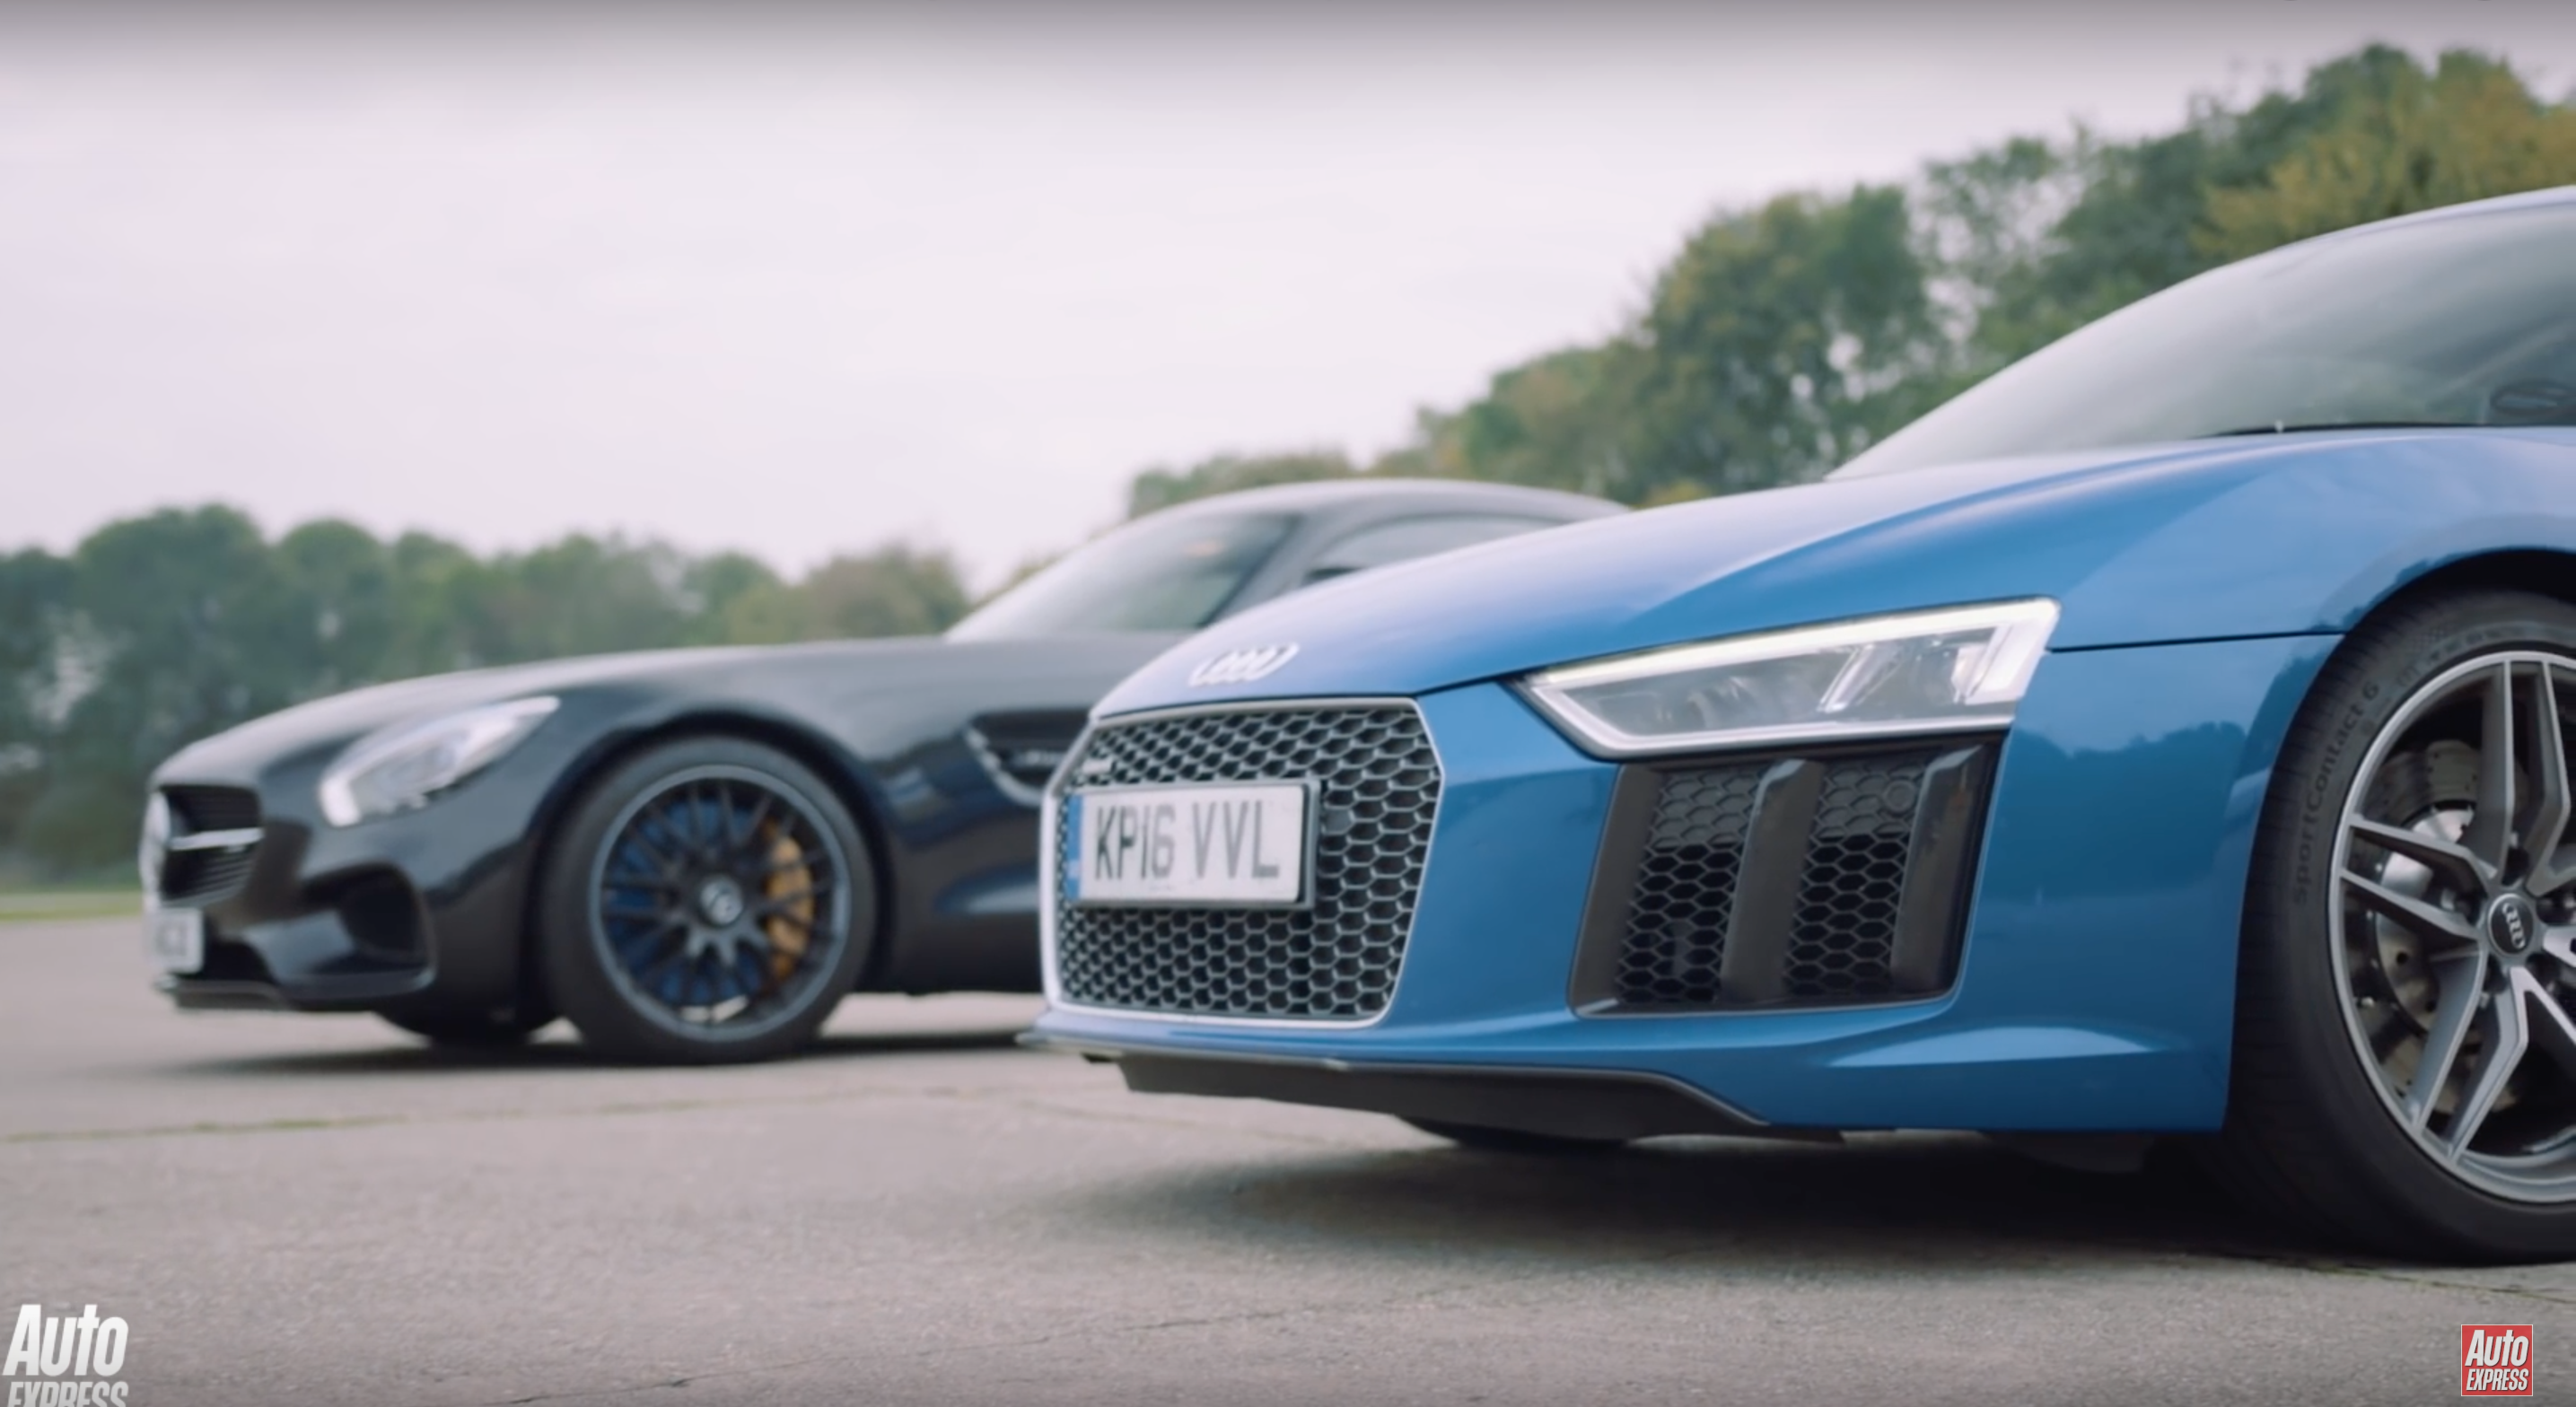 Mercedes-AMG GT S and Audi R8 V10 Take It to the Runway